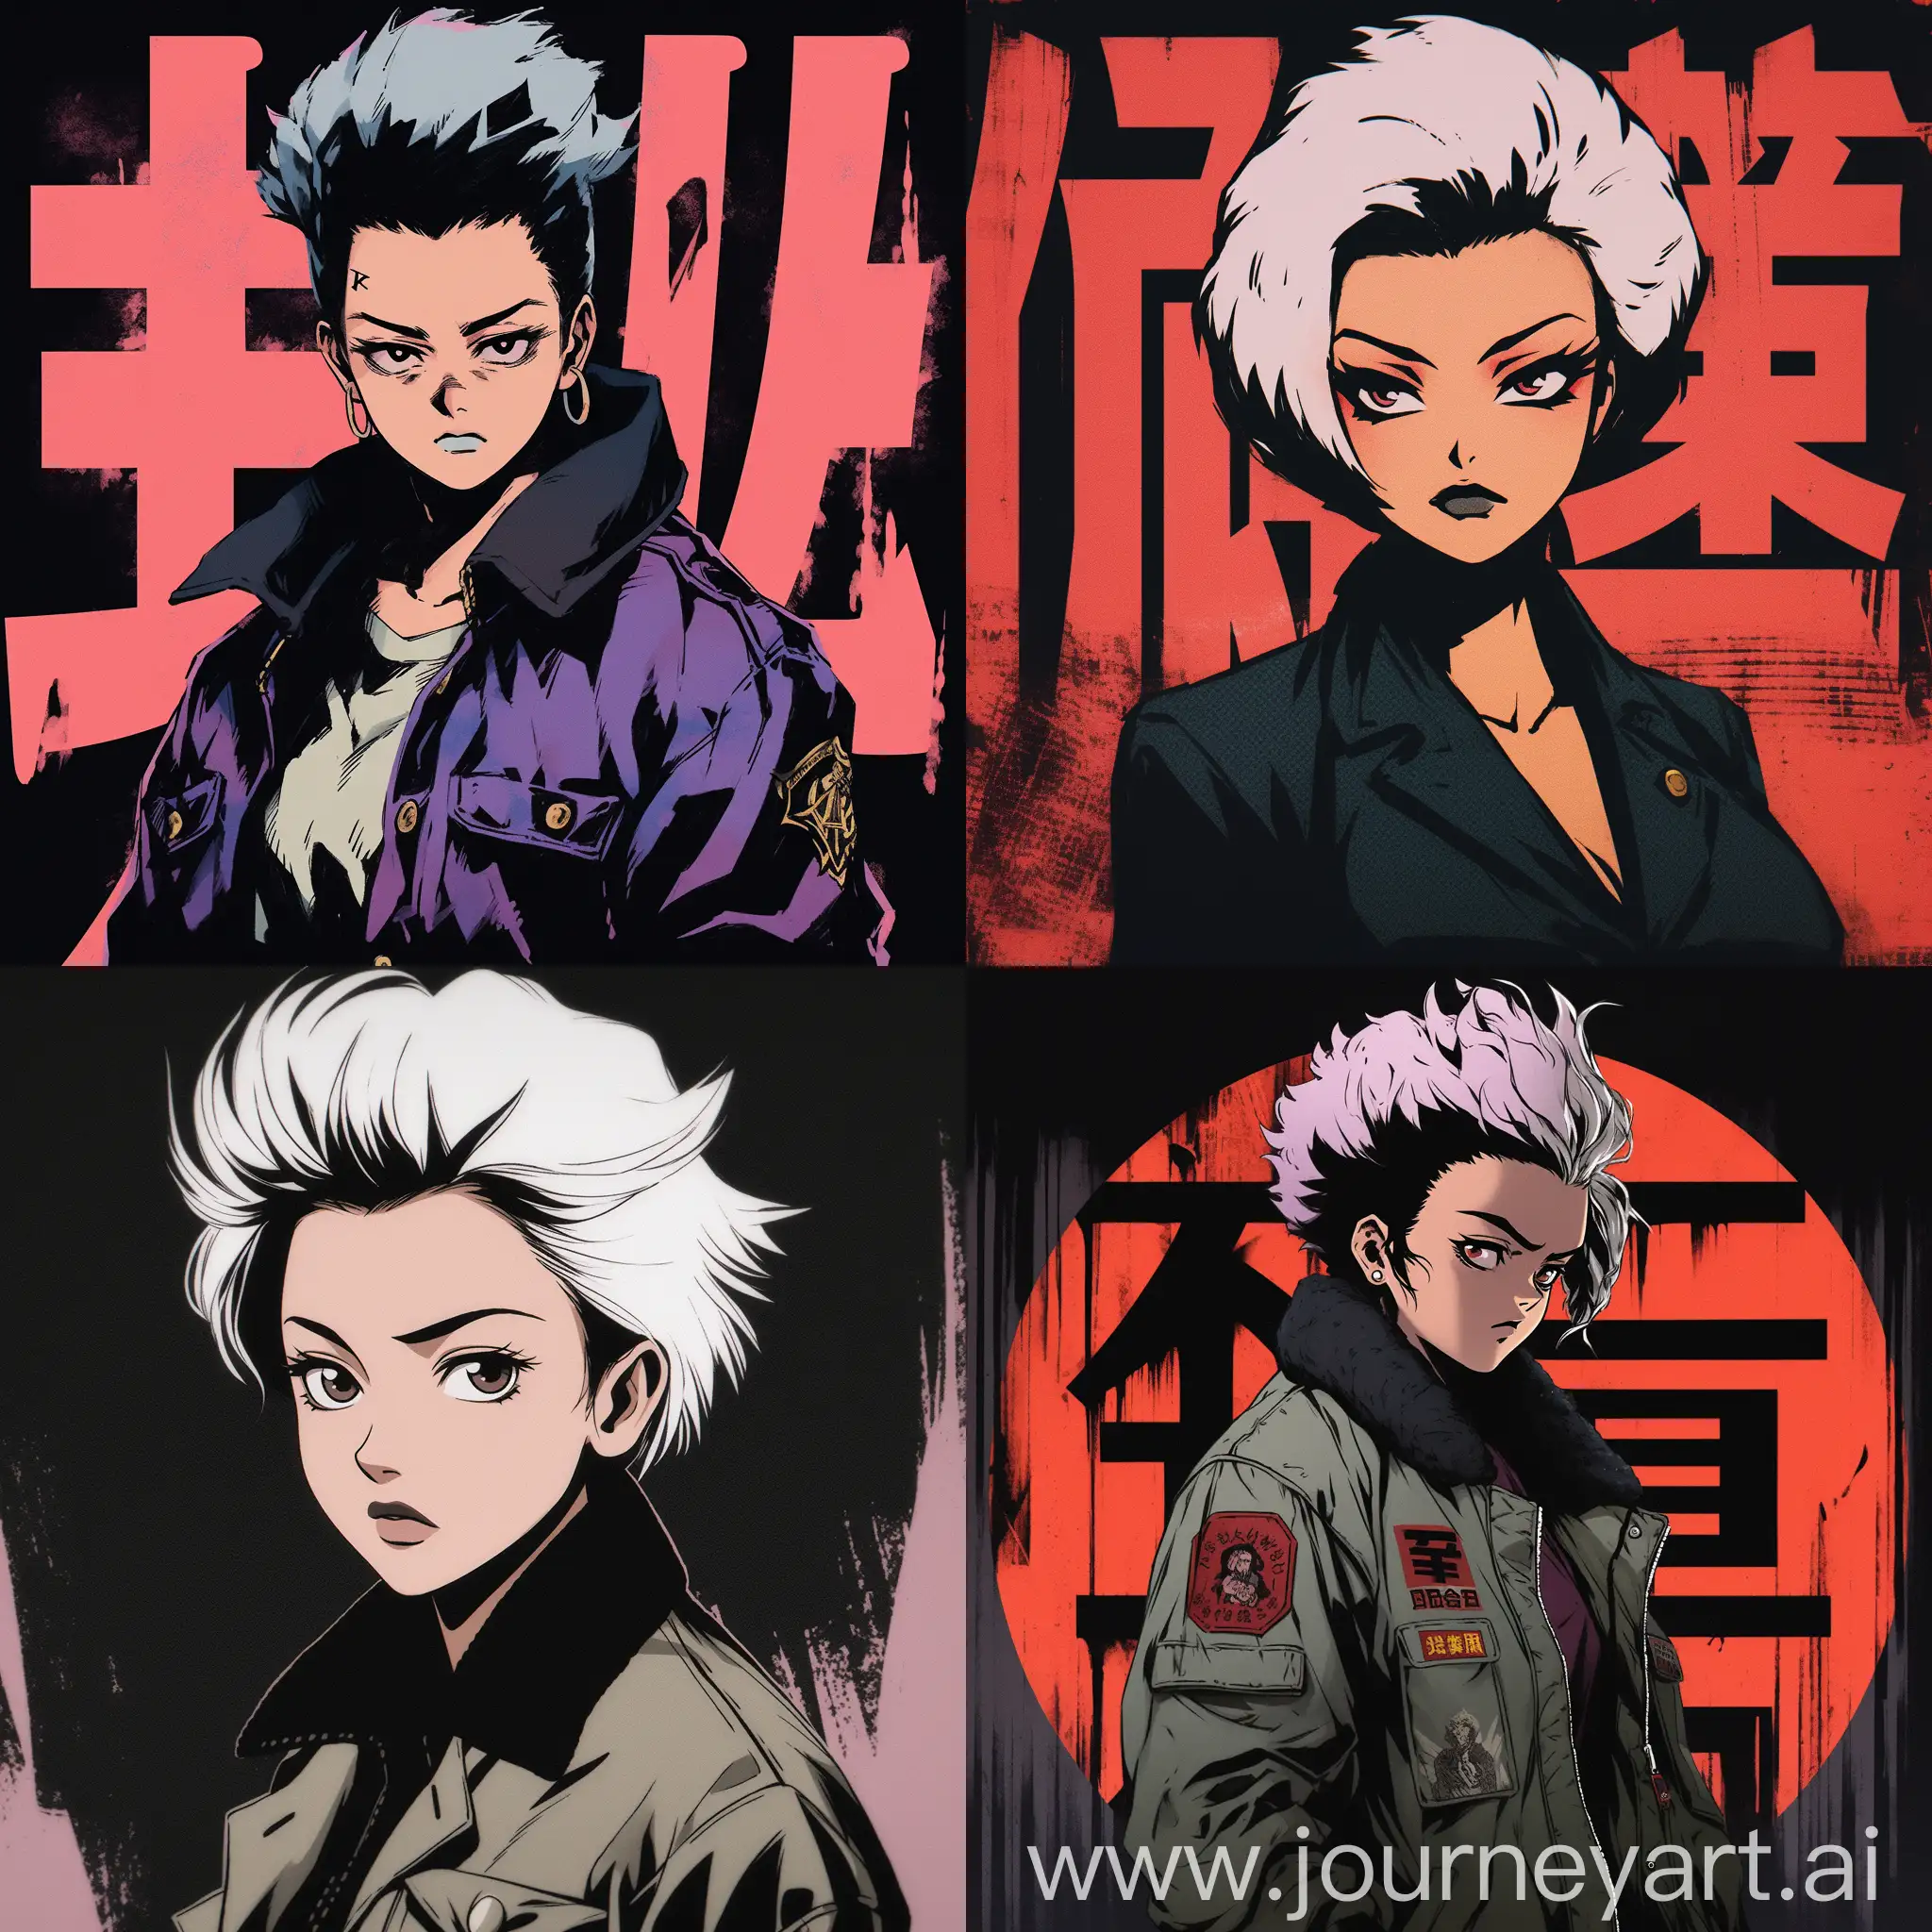 Stylish-Anime-Character-with-Short-White-Hair-in-Retro-Black-Jacket